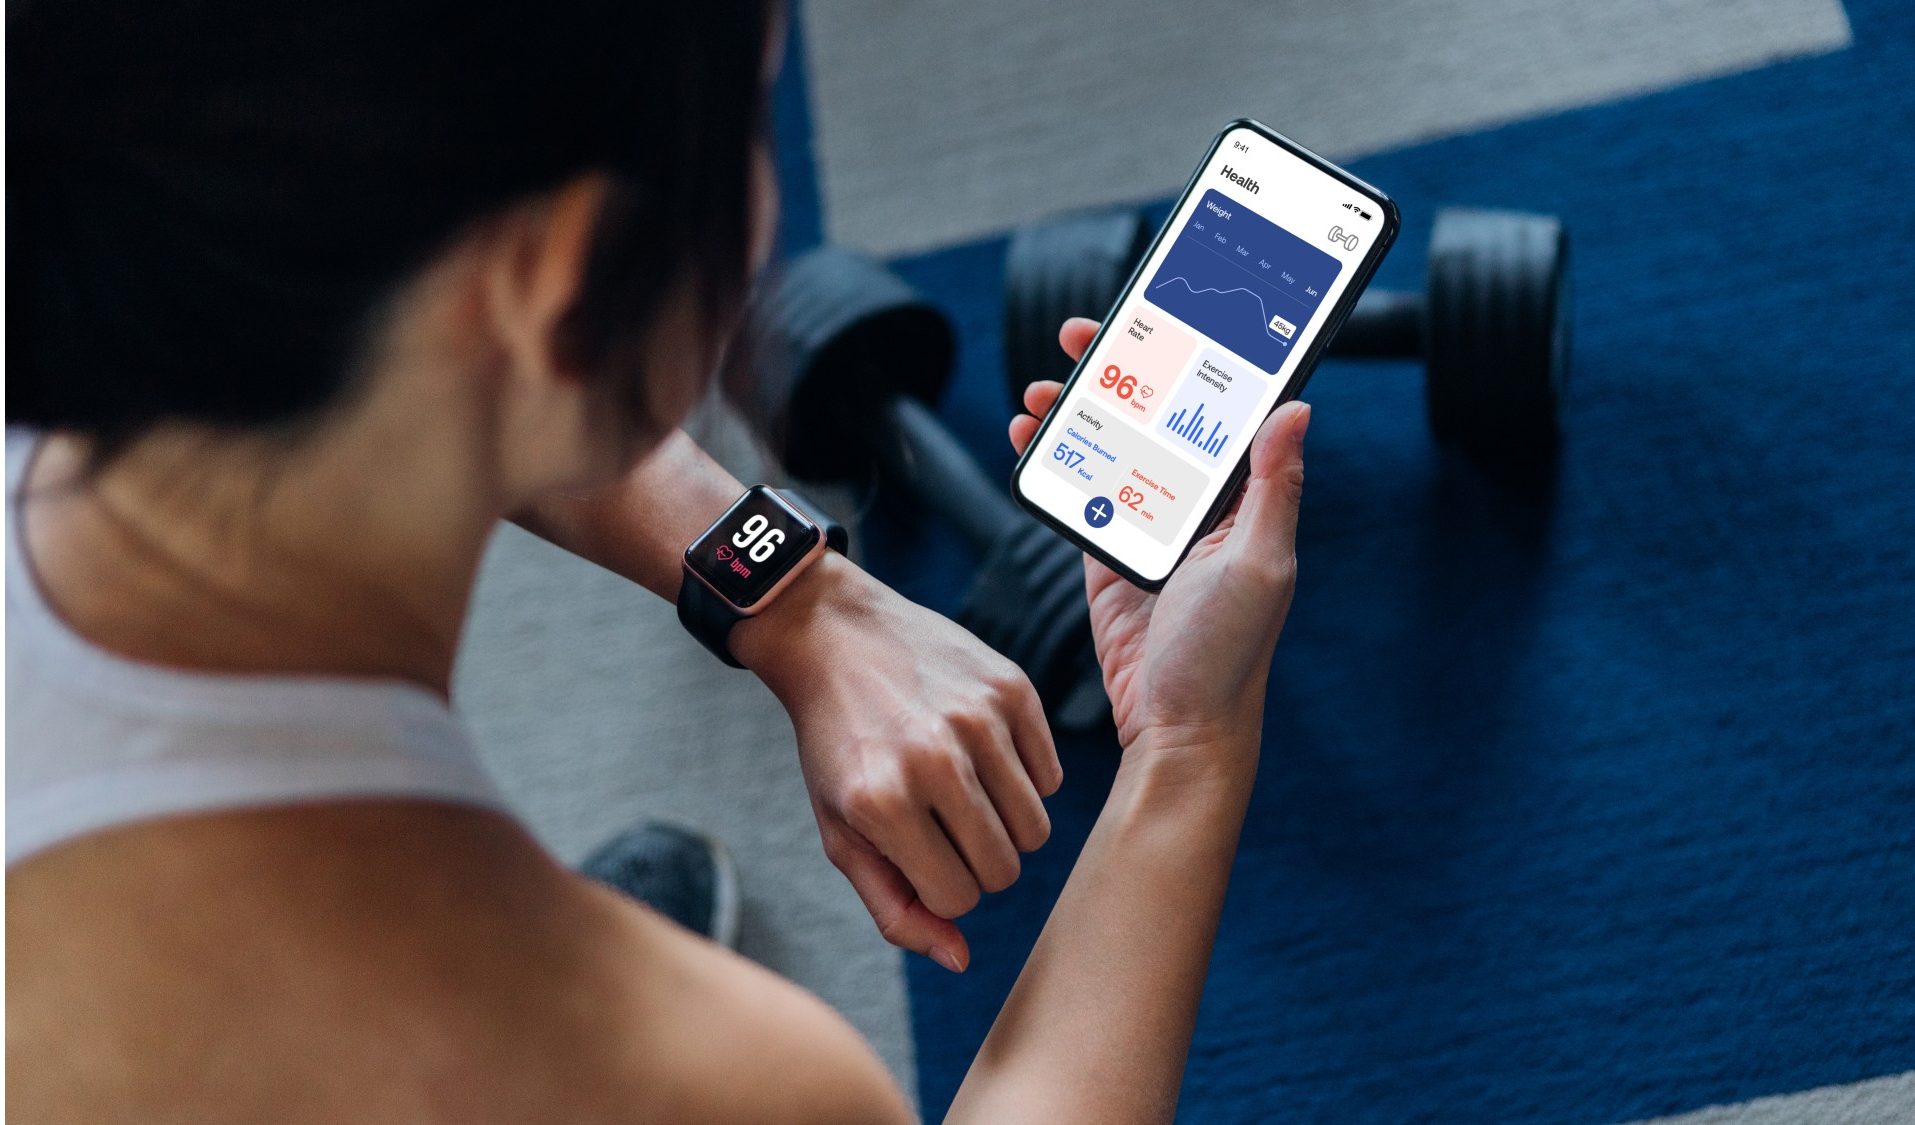 The Use Of Technology In Sports And Fitness, Including Wearables And Apps